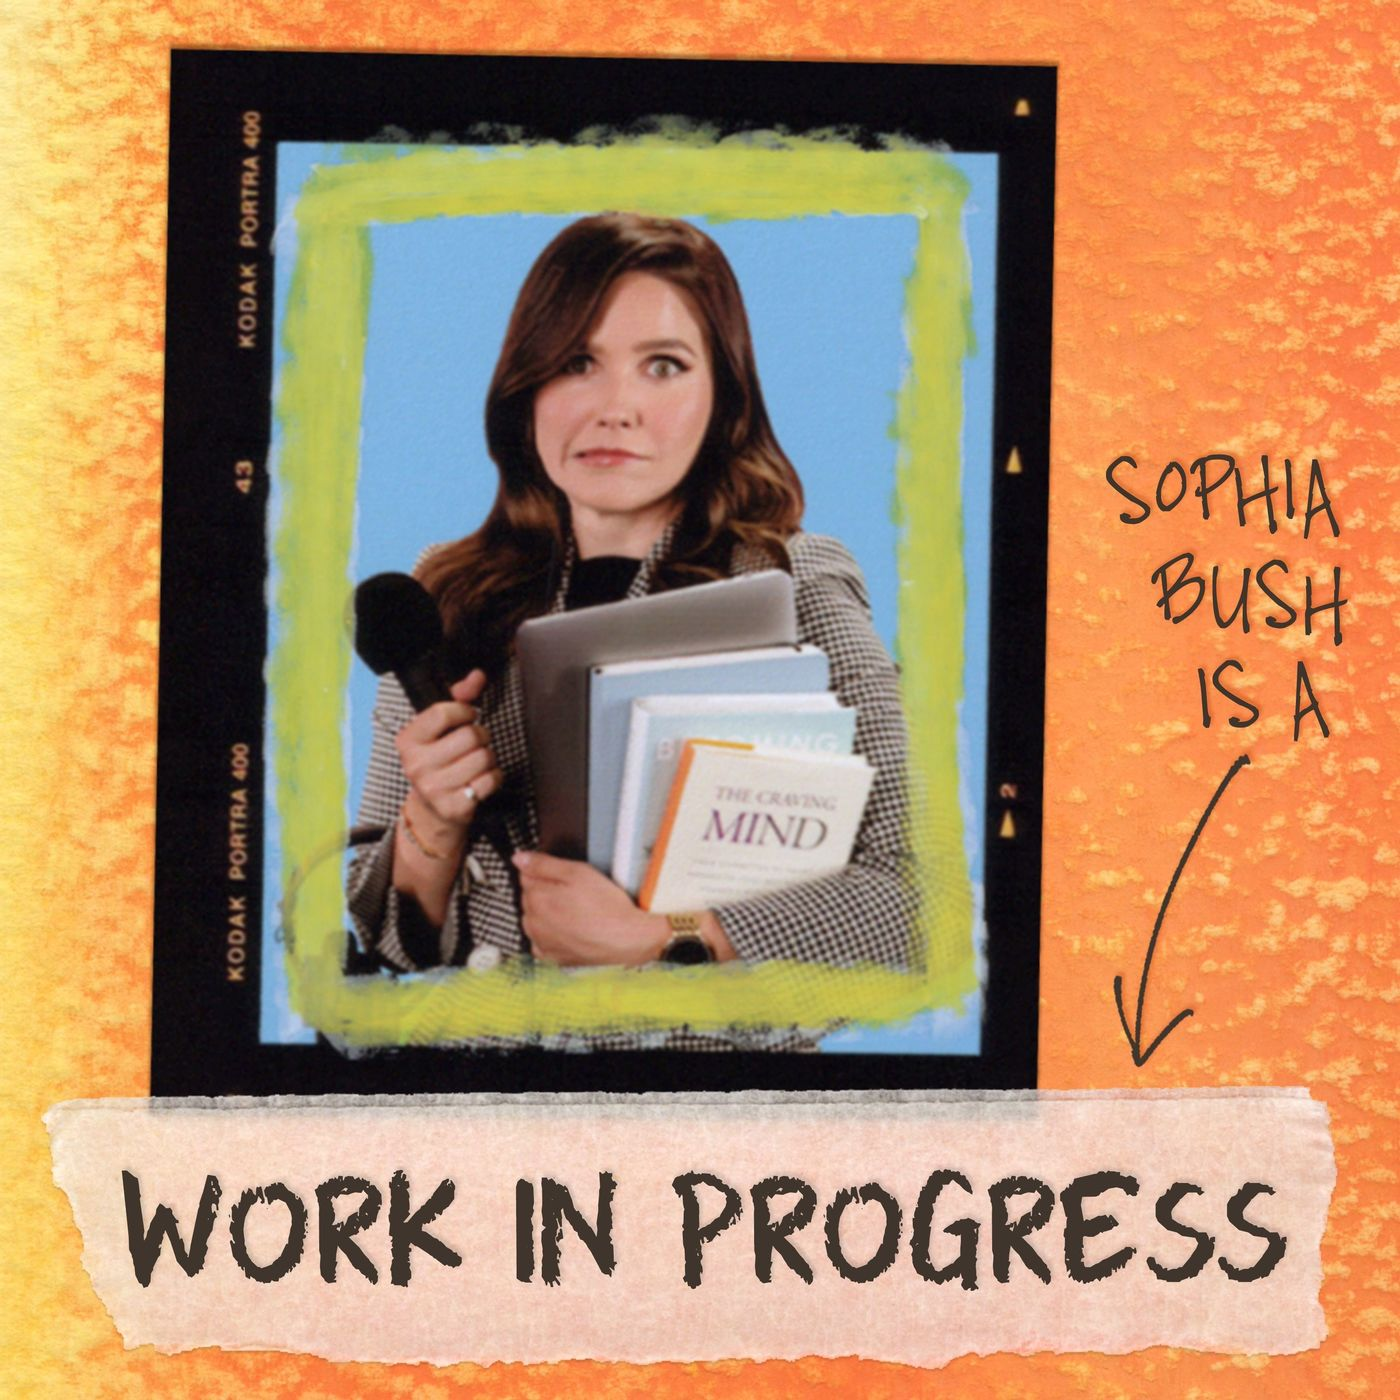 Welcome to "Work in Progress"